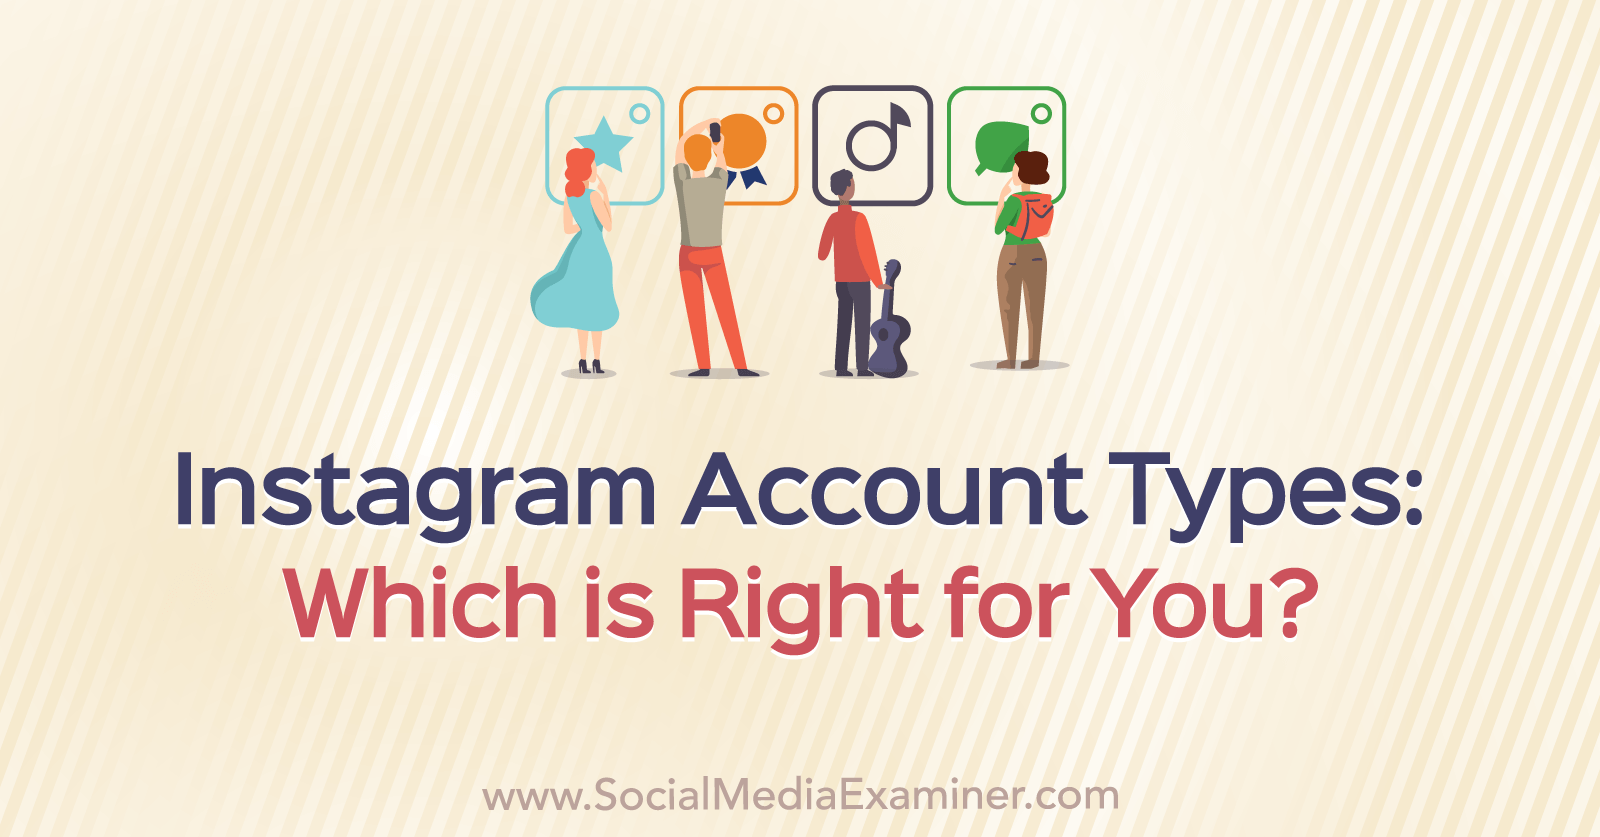 Instagram Account Types Which Is Right for You—Personal, Creator, or